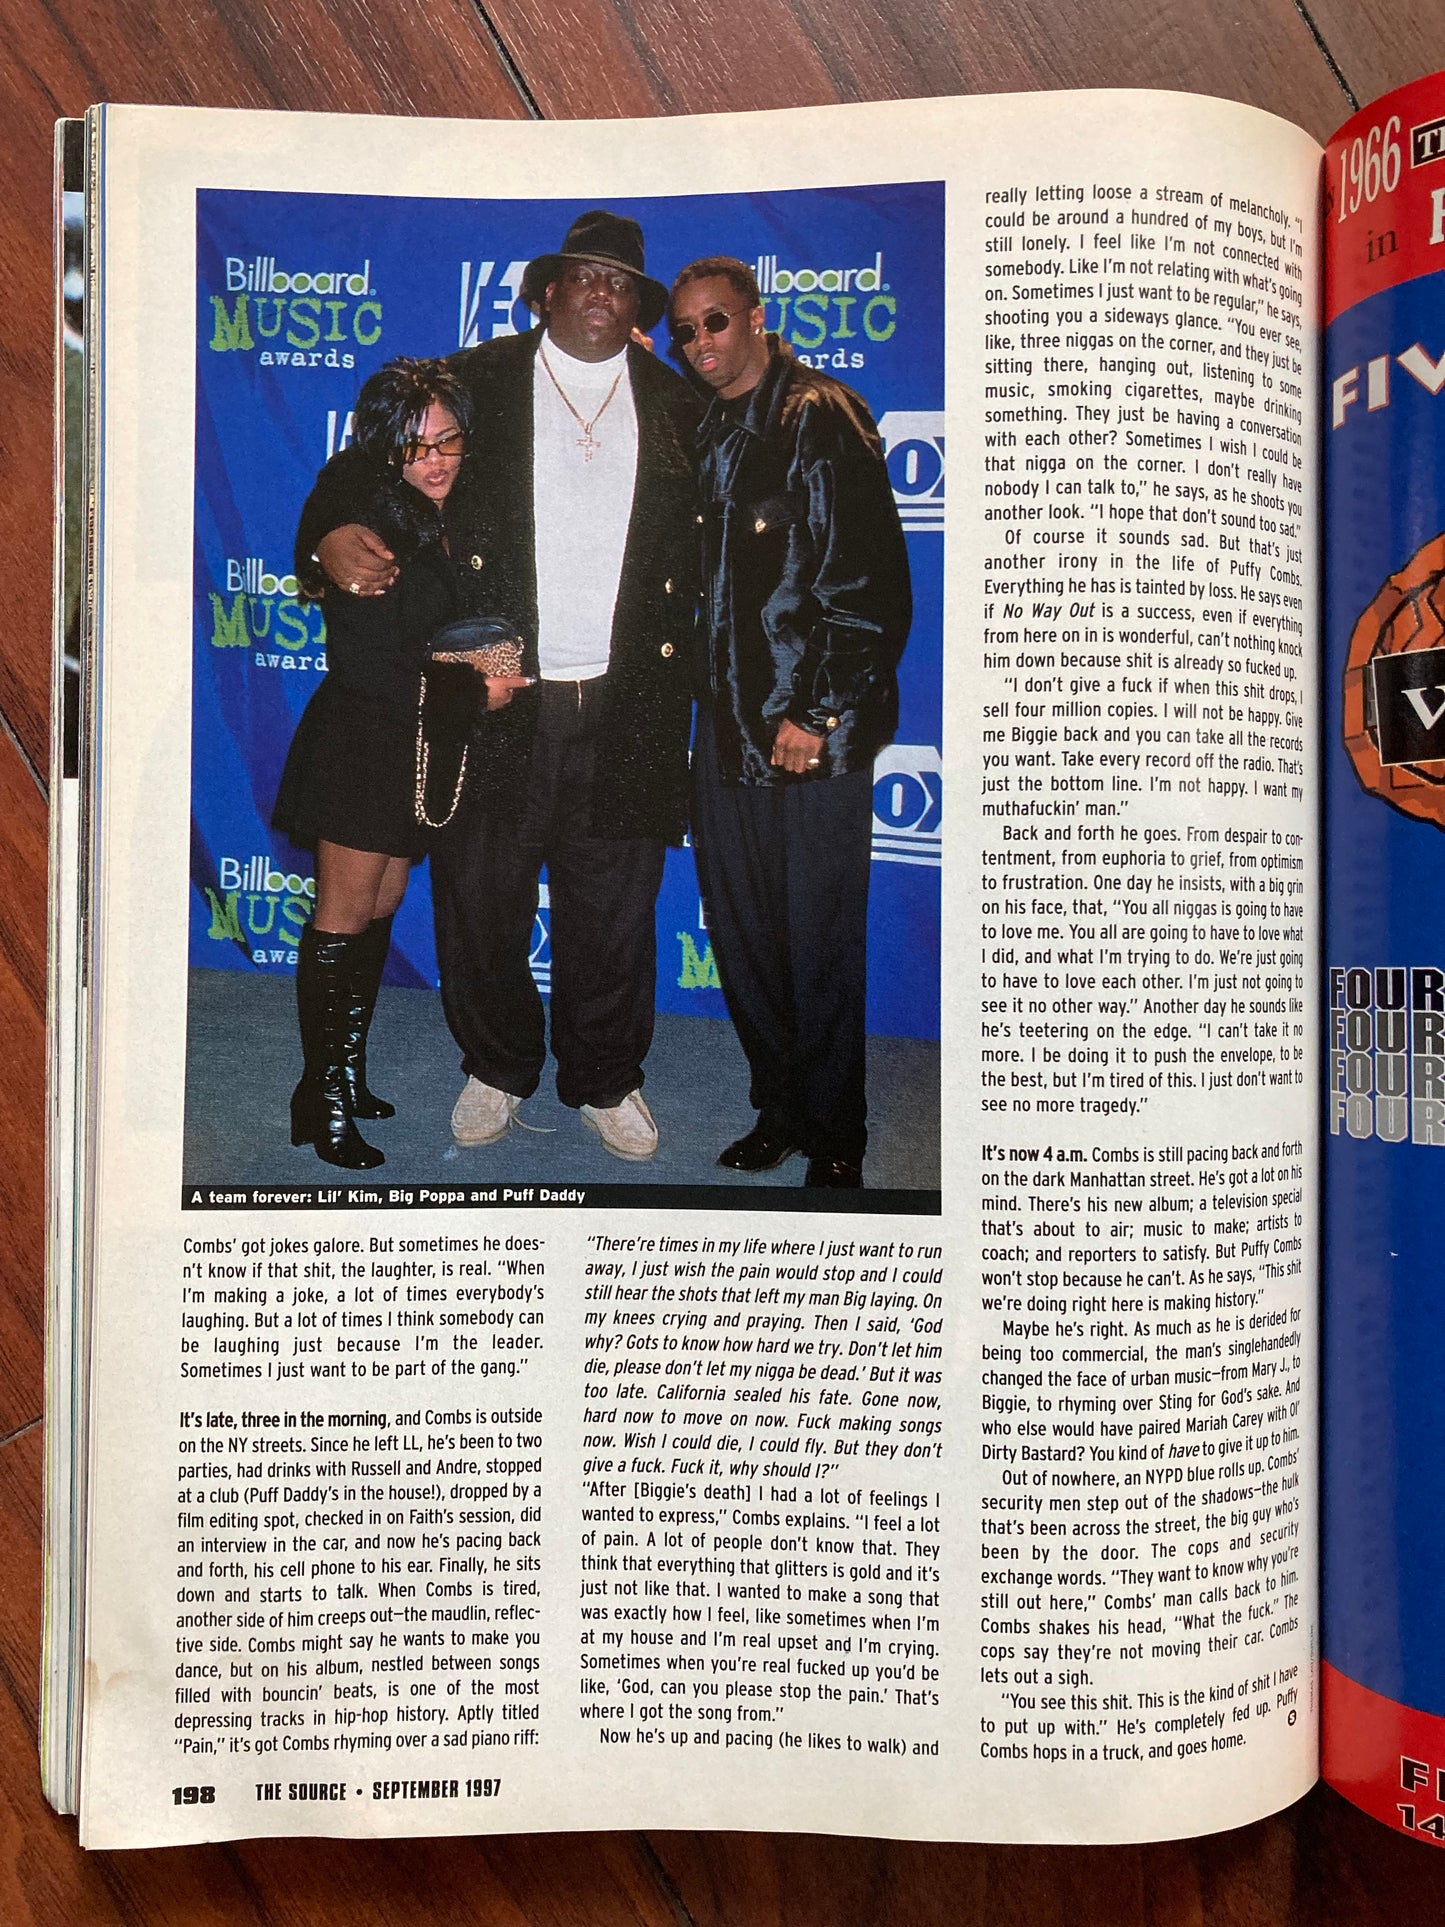 The Source Magazine September 1997 Puff Daddy - MoSneaks Shop Online